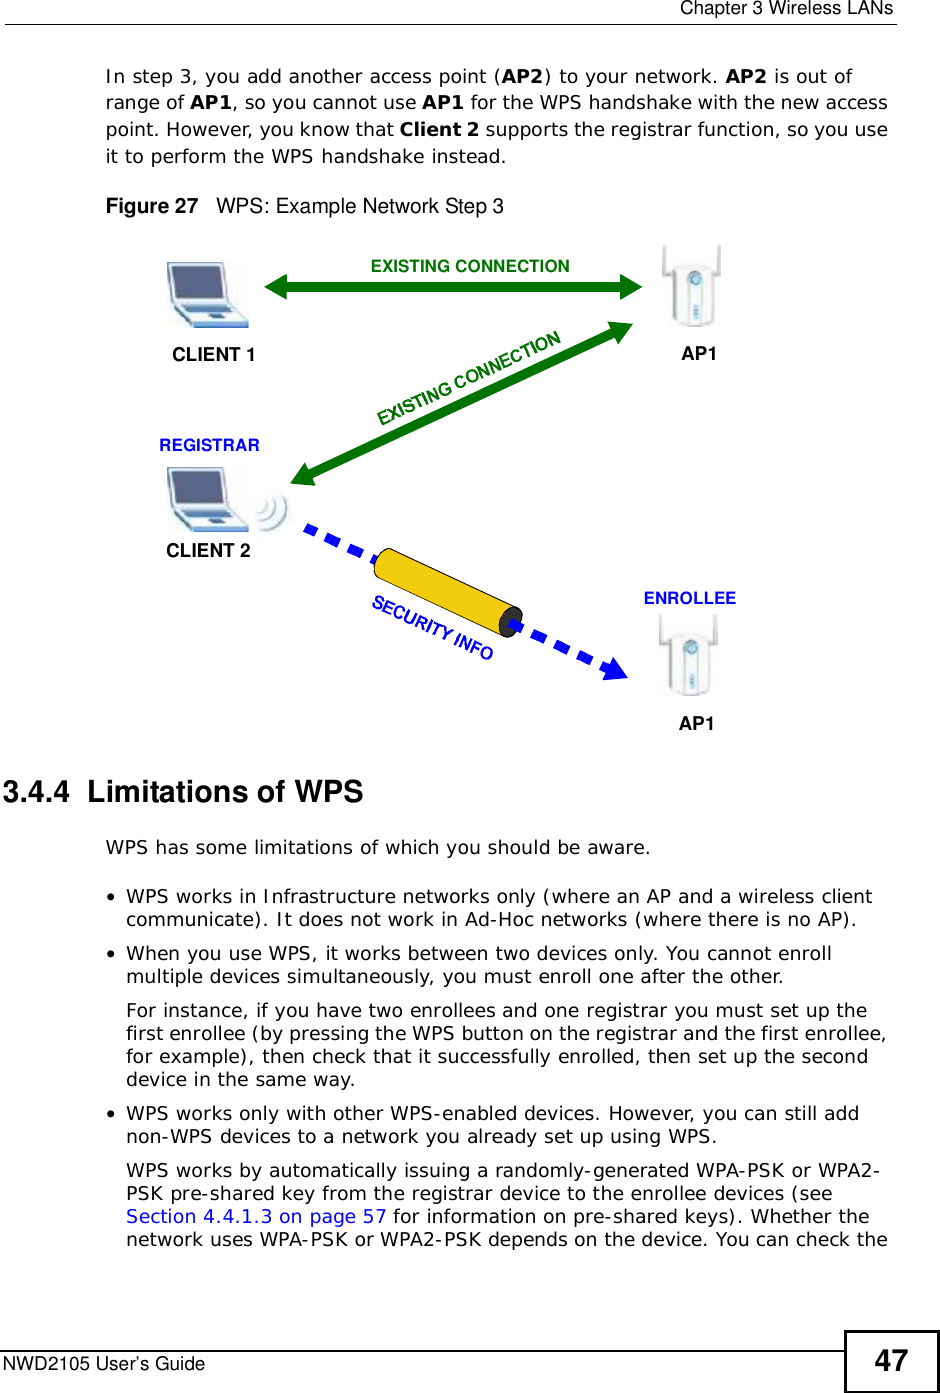  Chapter 3Wireless LANsNWD2105 User’s Guide 47In step 3, you add another access point (AP2) to your network. AP2 is out of range of AP1, so you cannot use AP1 for the WPS handshake with the new access point. However, you know that Client 2 supports the registrar function, so you use it to perform the WPS handshake instead.Figure 27   WPS: Example Network Step 33.4.4  Limitations of WPSWPS has some limitations of which you should be aware. •WPS works in Infrastructure networks only (where an AP and a wireless client communicate). It does not work in Ad-Hoc networks (where there is no AP).•When you use WPS, it works between two devices only. You cannot enroll multiple devices simultaneously, you must enroll one after the other. For instance, if you have two enrollees and one registrar you must set up the first enrollee (by pressing the WPS button on the registrar and the first enrollee, for example), then check that it successfully enrolled, then set up the second device in the same way.•WPS works only with other WPS-enabled devices. However, you can still add non-WPS devices to a network you already set up using WPS. WPS works by automatically issuing a randomly-generated WPA-PSK or WPA2-PSK pre-shared key from the registrar device to the enrollee devices (see Section 4.4.1.3 on page 57 for information on pre-shared keys). Whether the network uses WPA-PSK or WPA2-PSK depends on the device. You can check the CLIENT 1 AP1REGISTRARCLIENT 2EXISTING CONNECTIONENROLLEEAP1